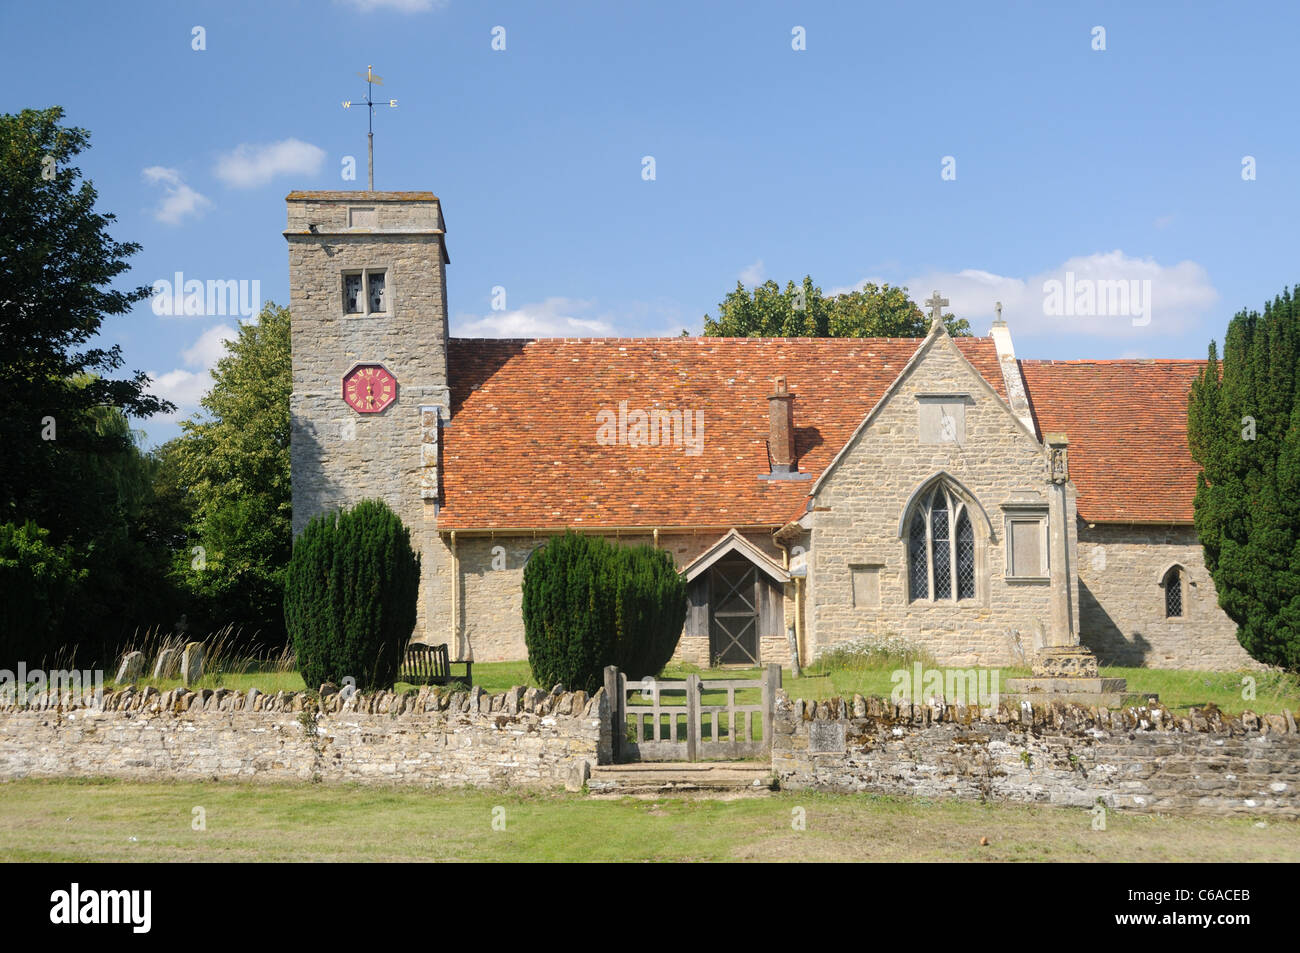 The Church of St. Margaret of Antioch, in Knotting, Bedfordshire, England Stock Photo